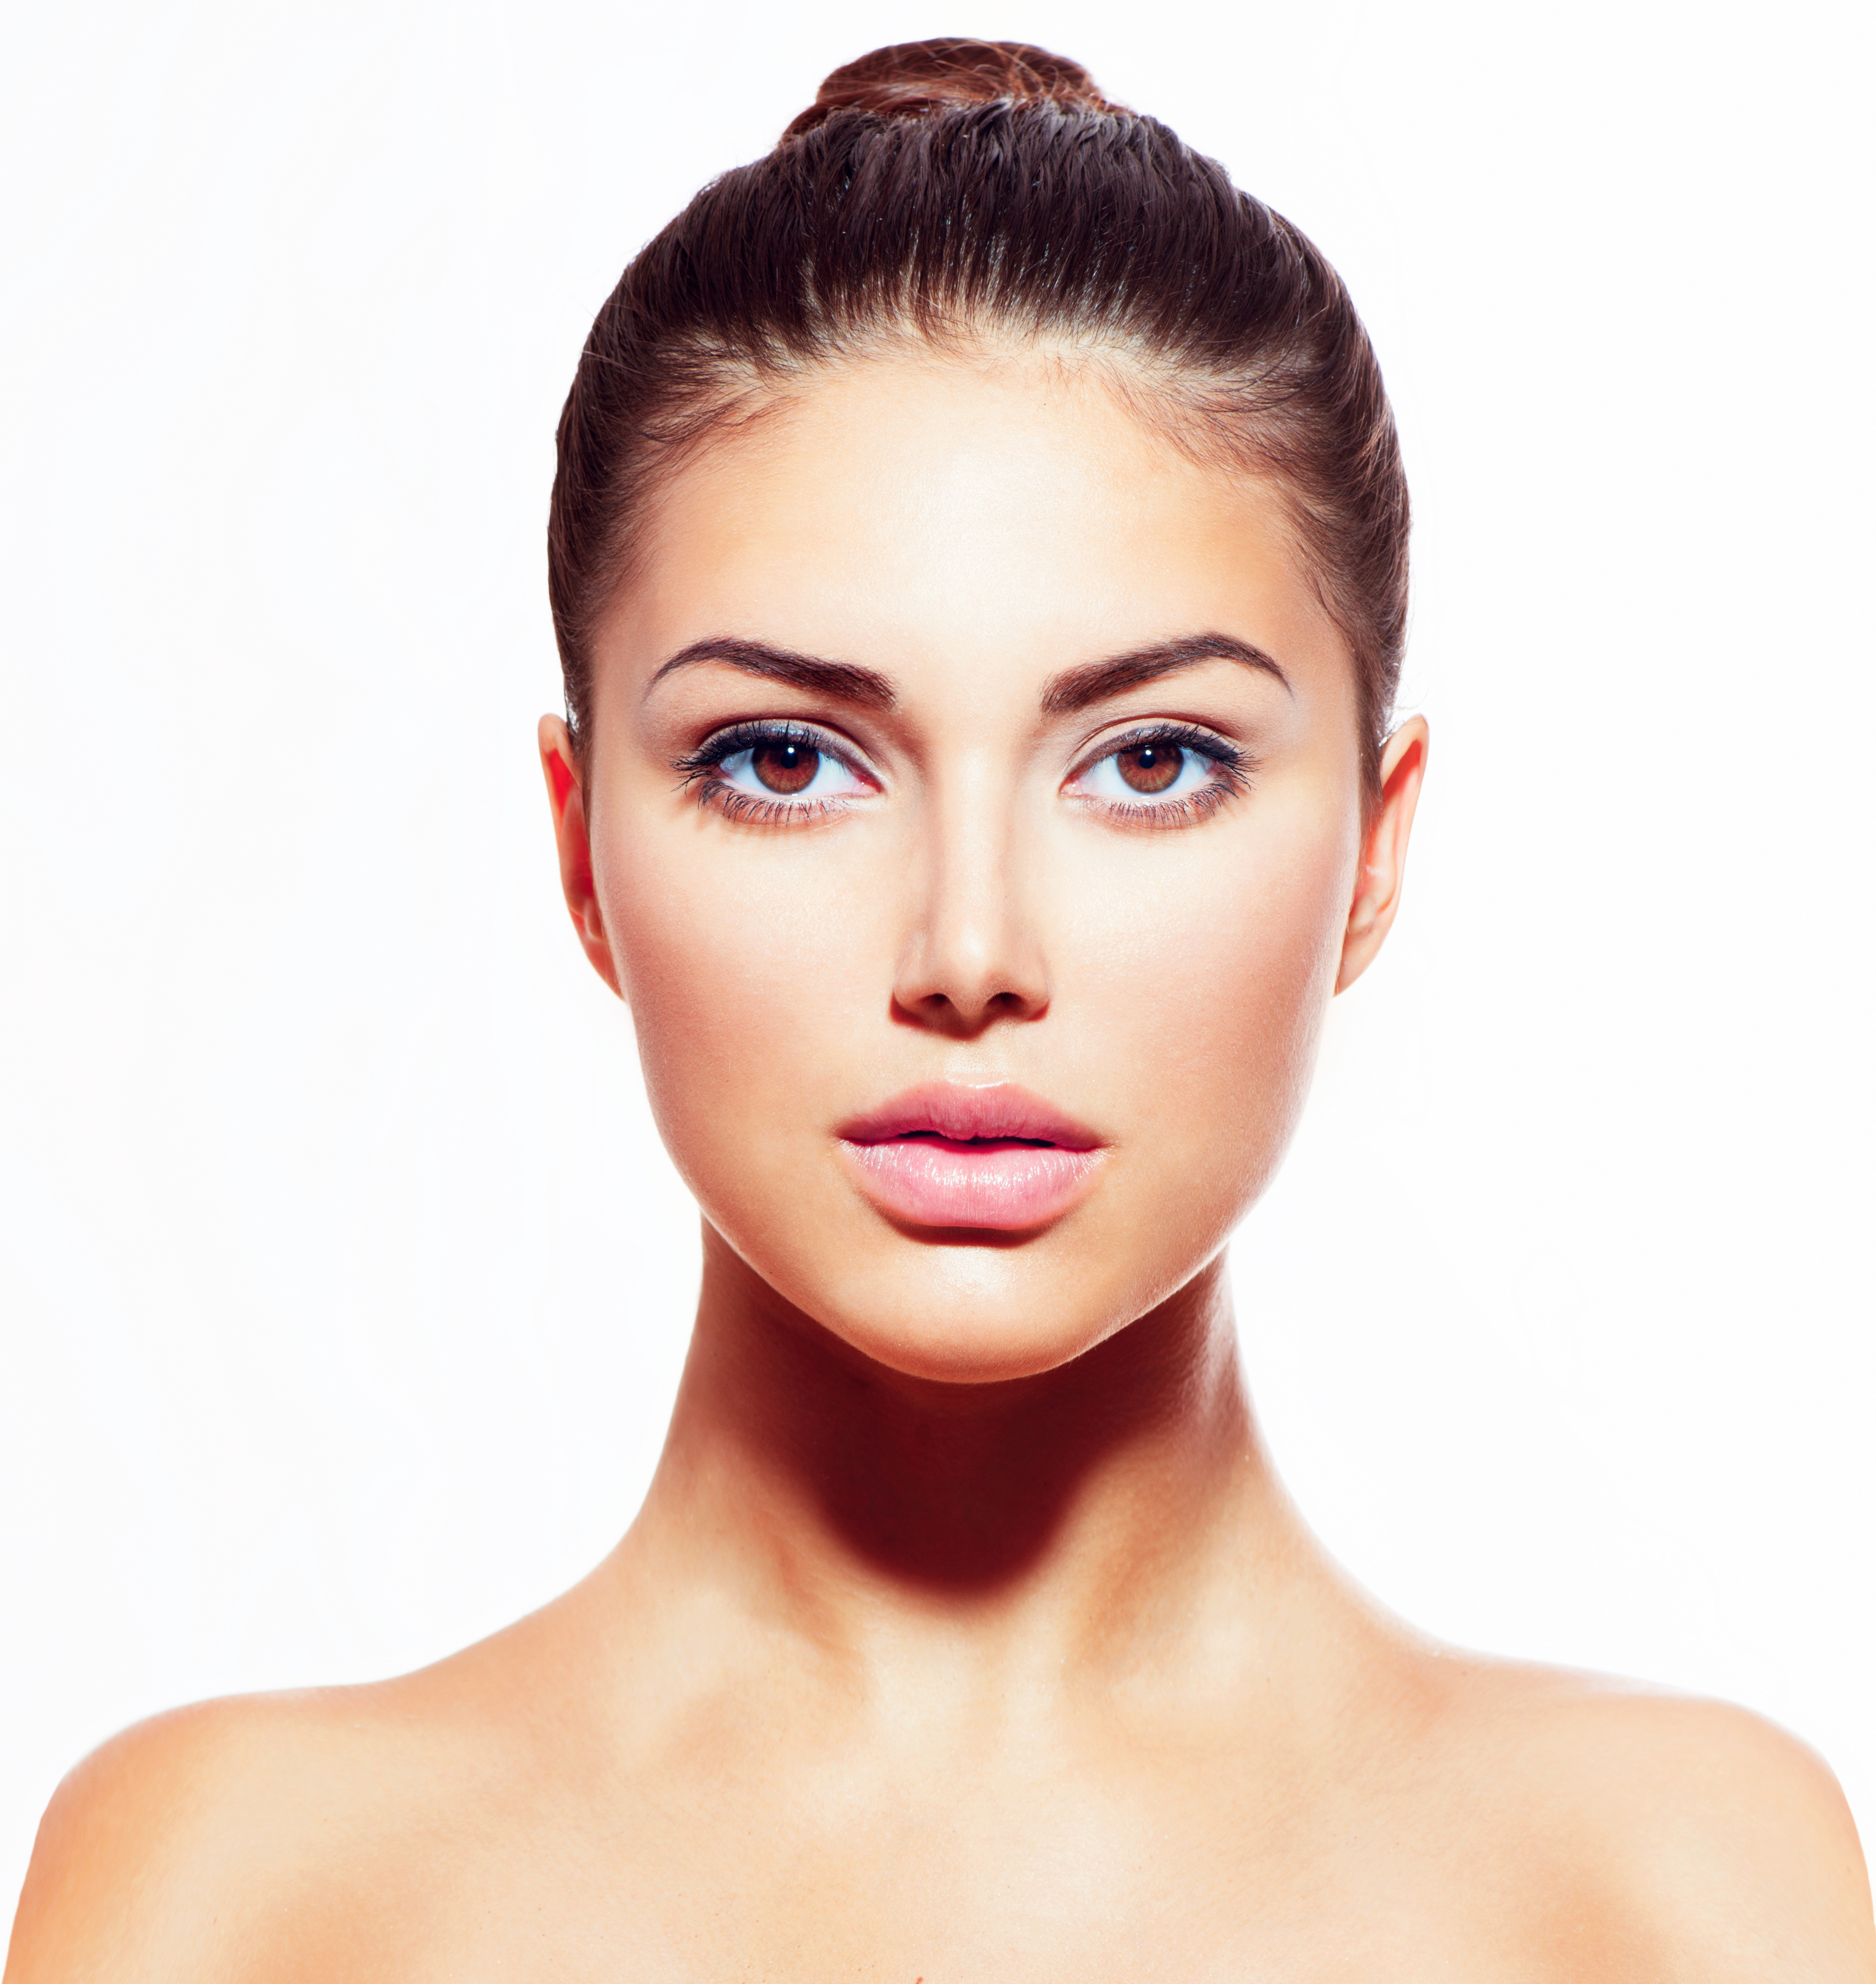 Facial Plastic Surgery - Types of Lifts, Cost, Recovery, & Results